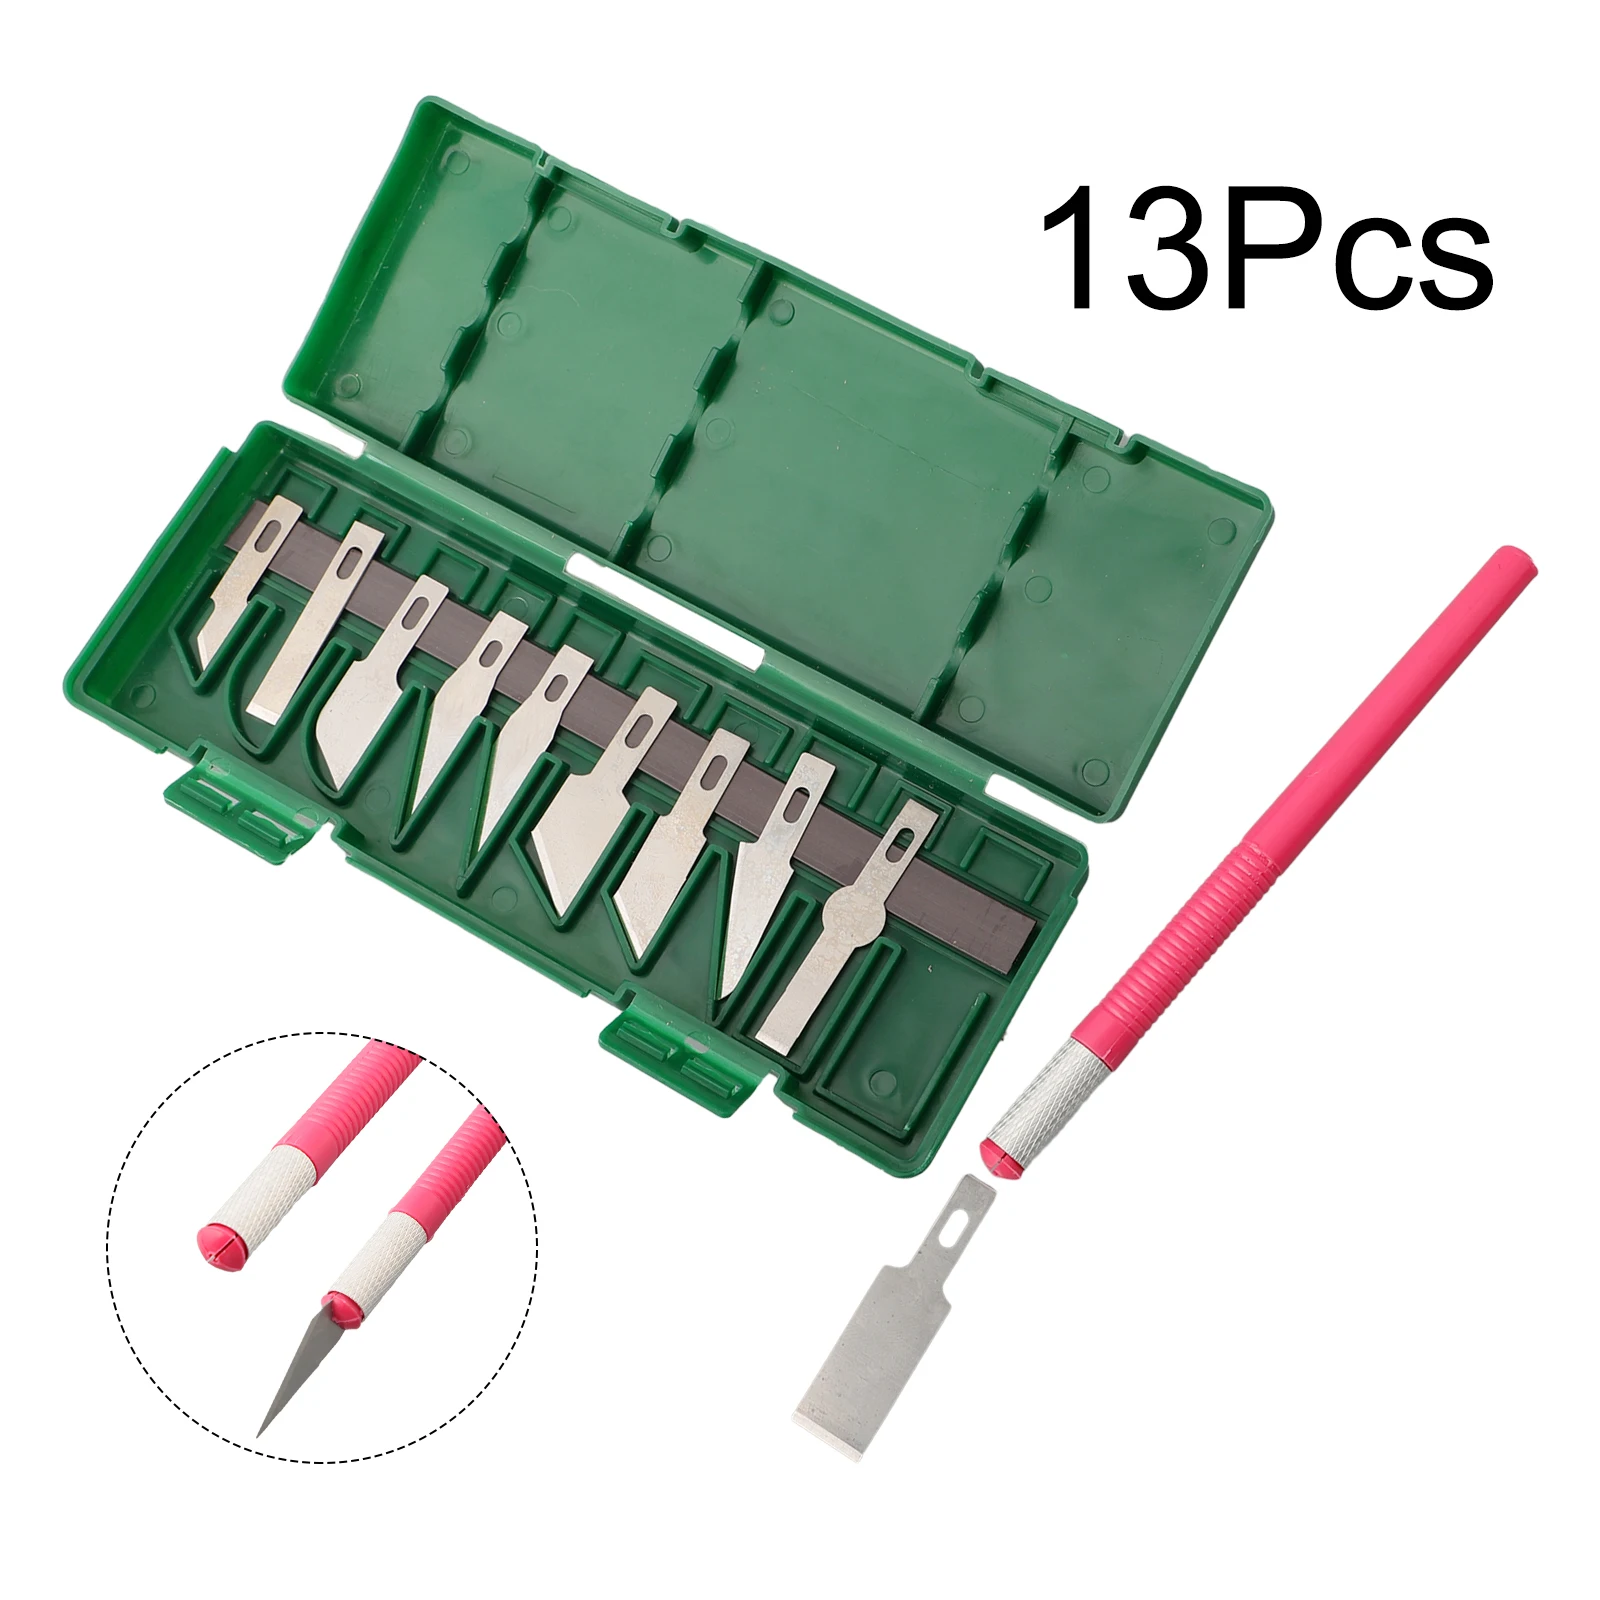 

13Pcs Set Art Carving Cutter With Box Premium Paper Sticker Cutter Wood Carving Blade Precision Hand Tool Art Carving Tools